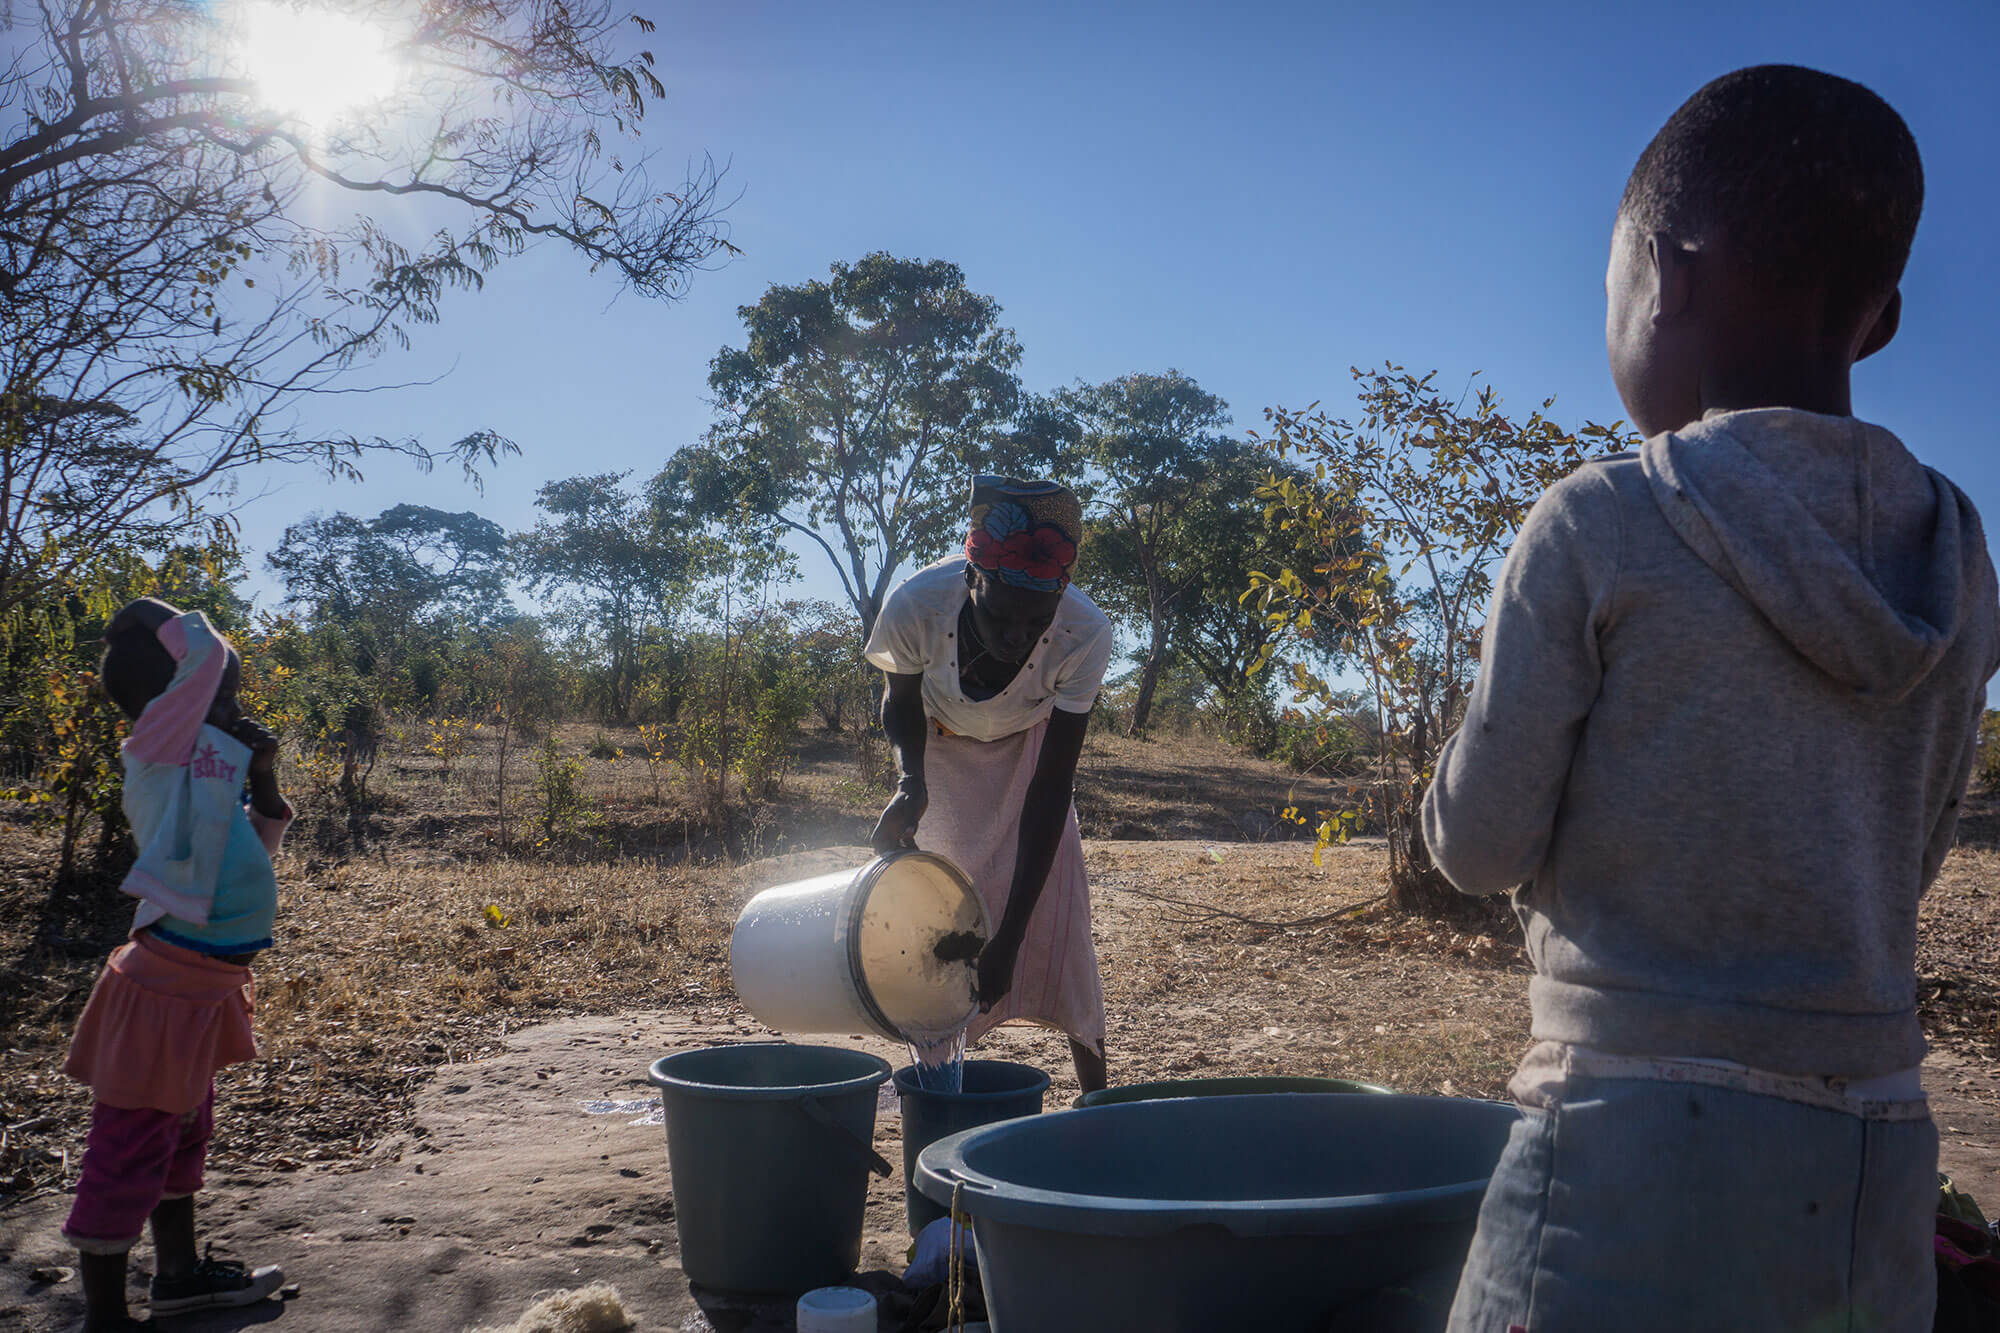 Our water, sanitation and hygiene team has been building new solar-powered water pumps across Zimbabwe, in communities like Mpumelelo and Zumanana.